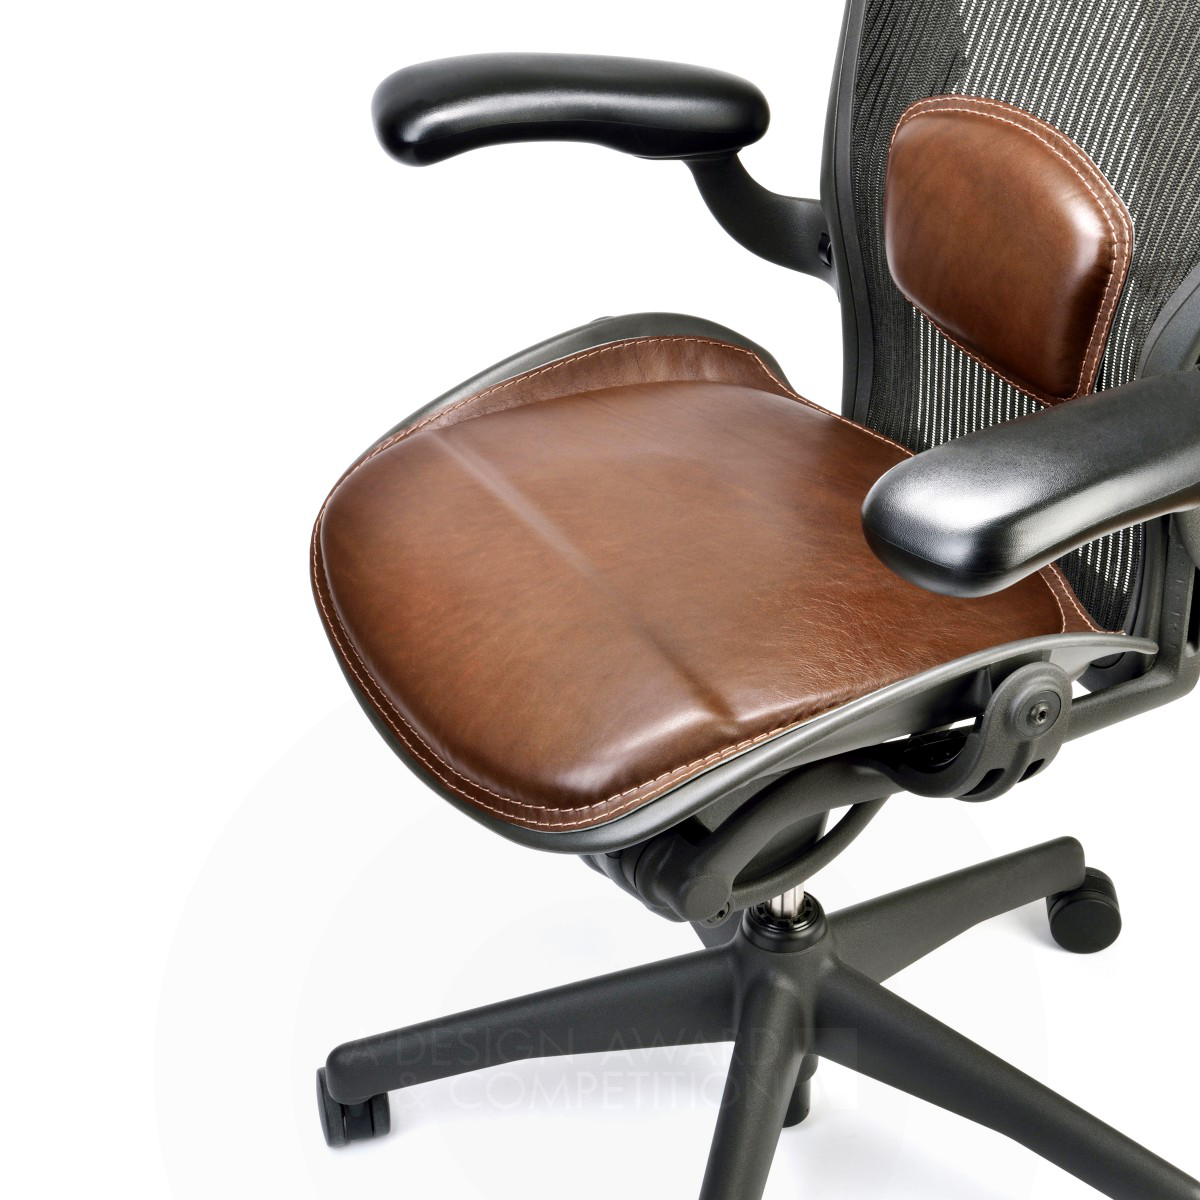 Saddle Collection Aeron Cushion Set by Paolo Roth